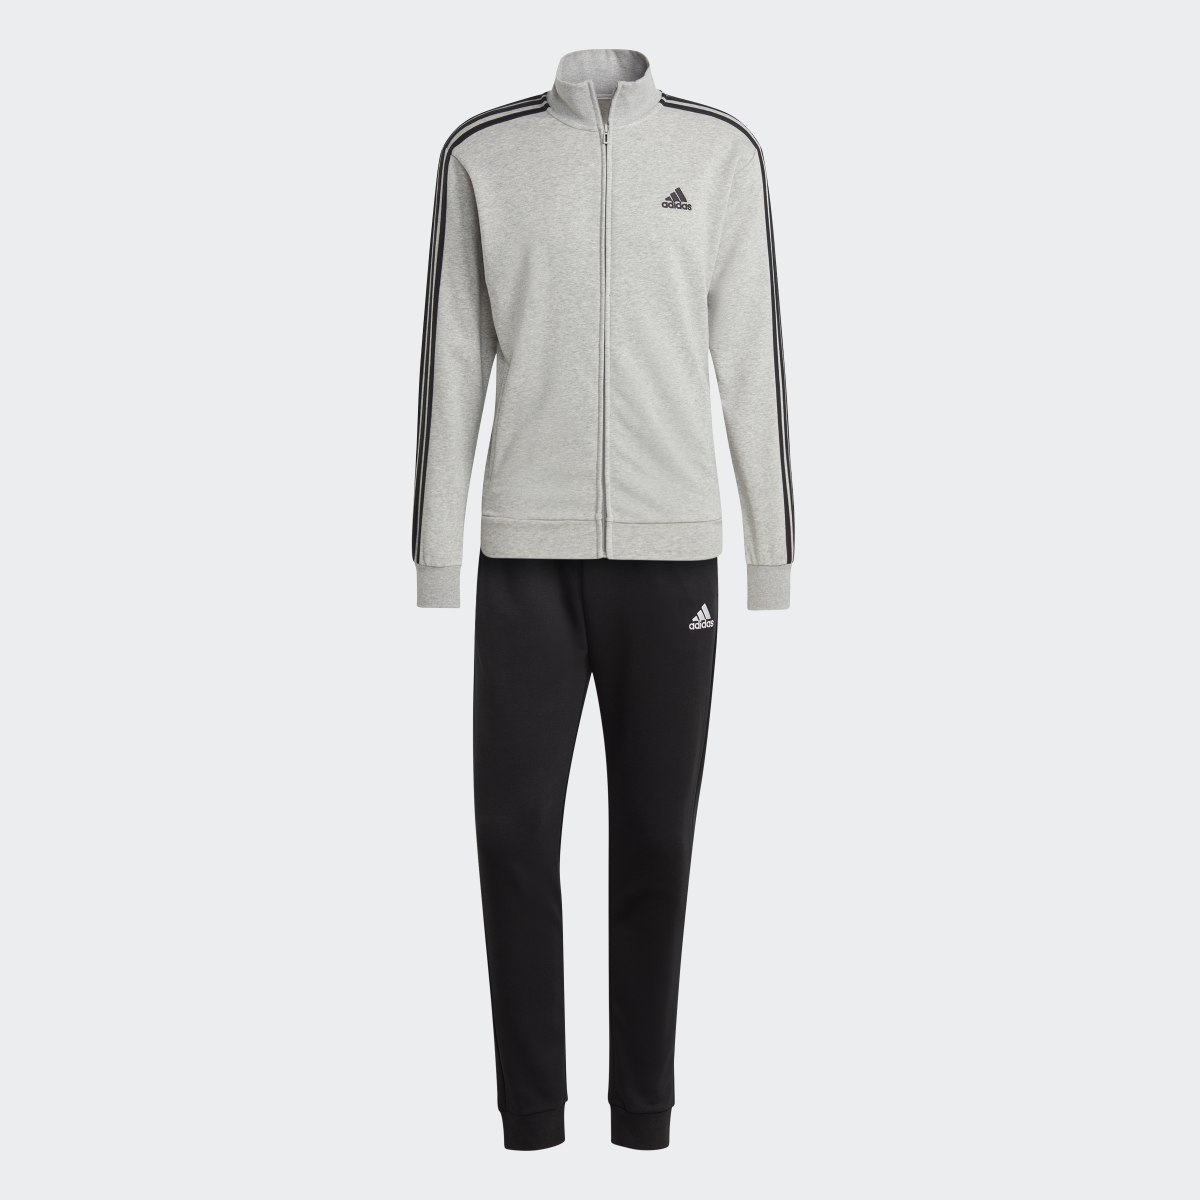 Adidas Basic 3-Stripes French Terry Track Suit. 5